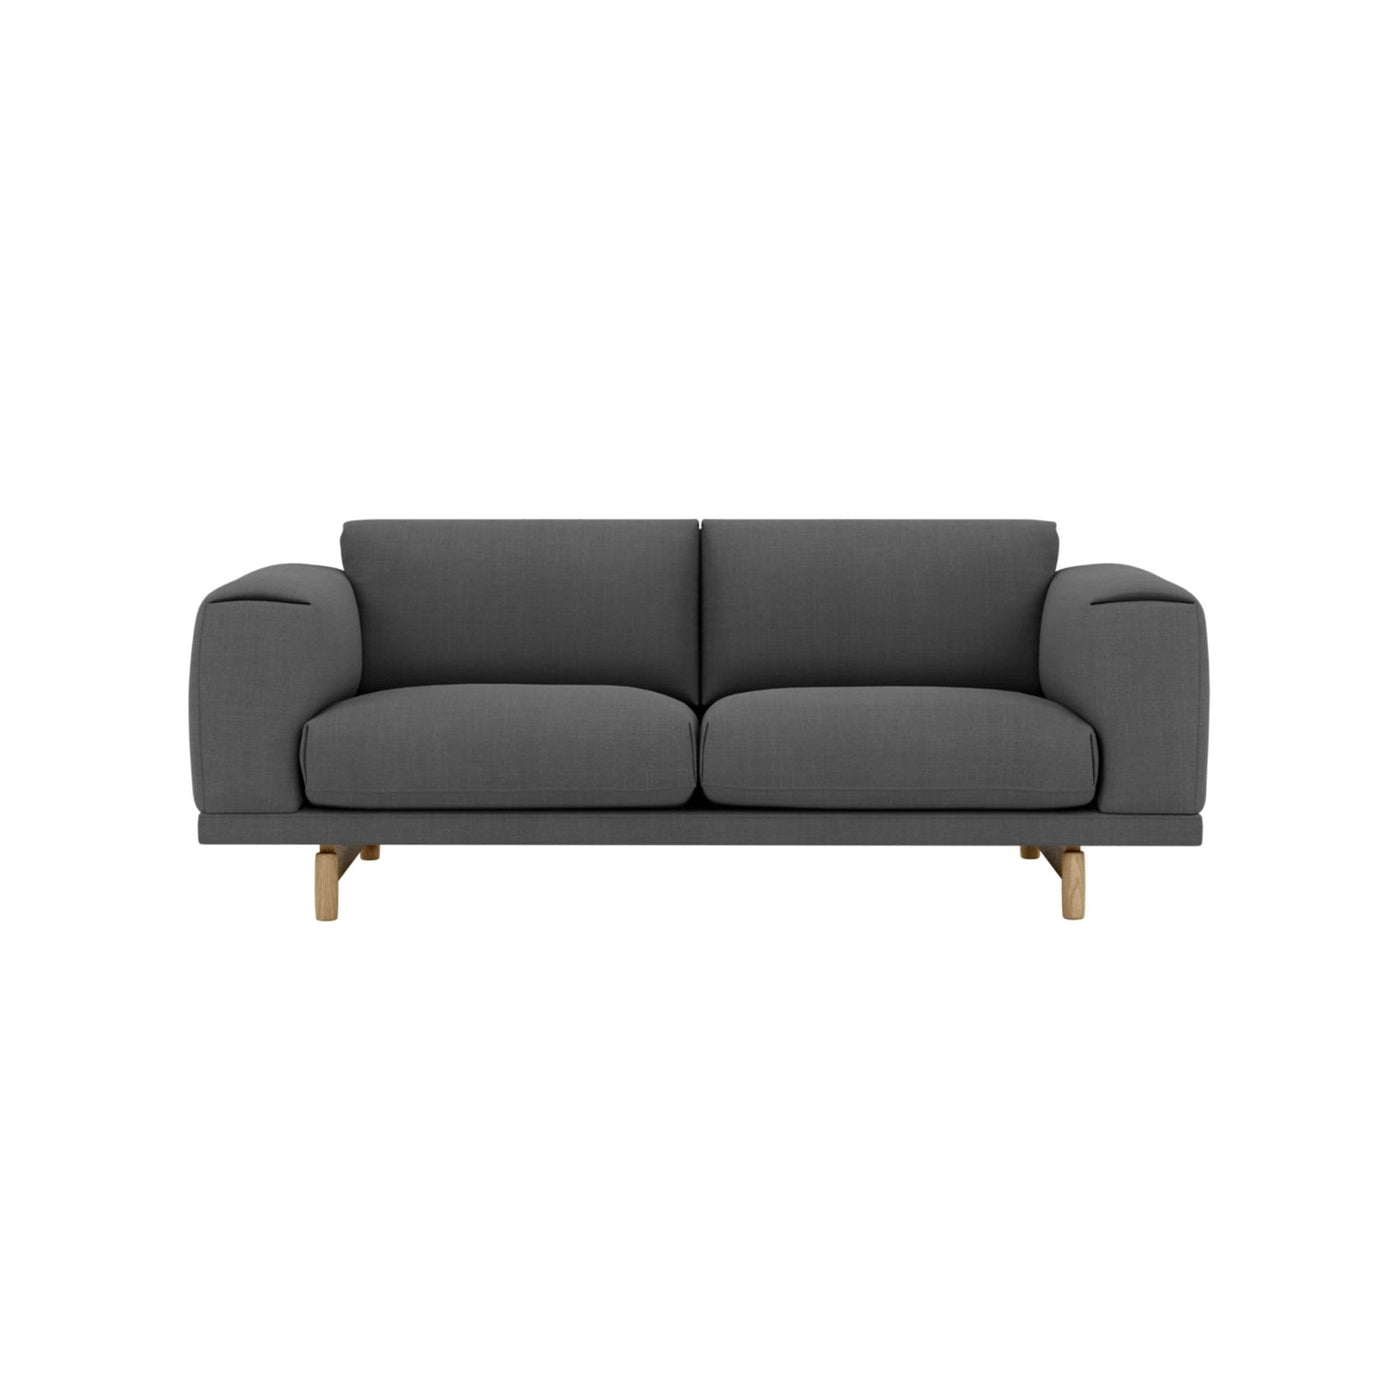 Muuto Rest Sofa 2 Seater, made to order from someday designs. #colour_remix-163